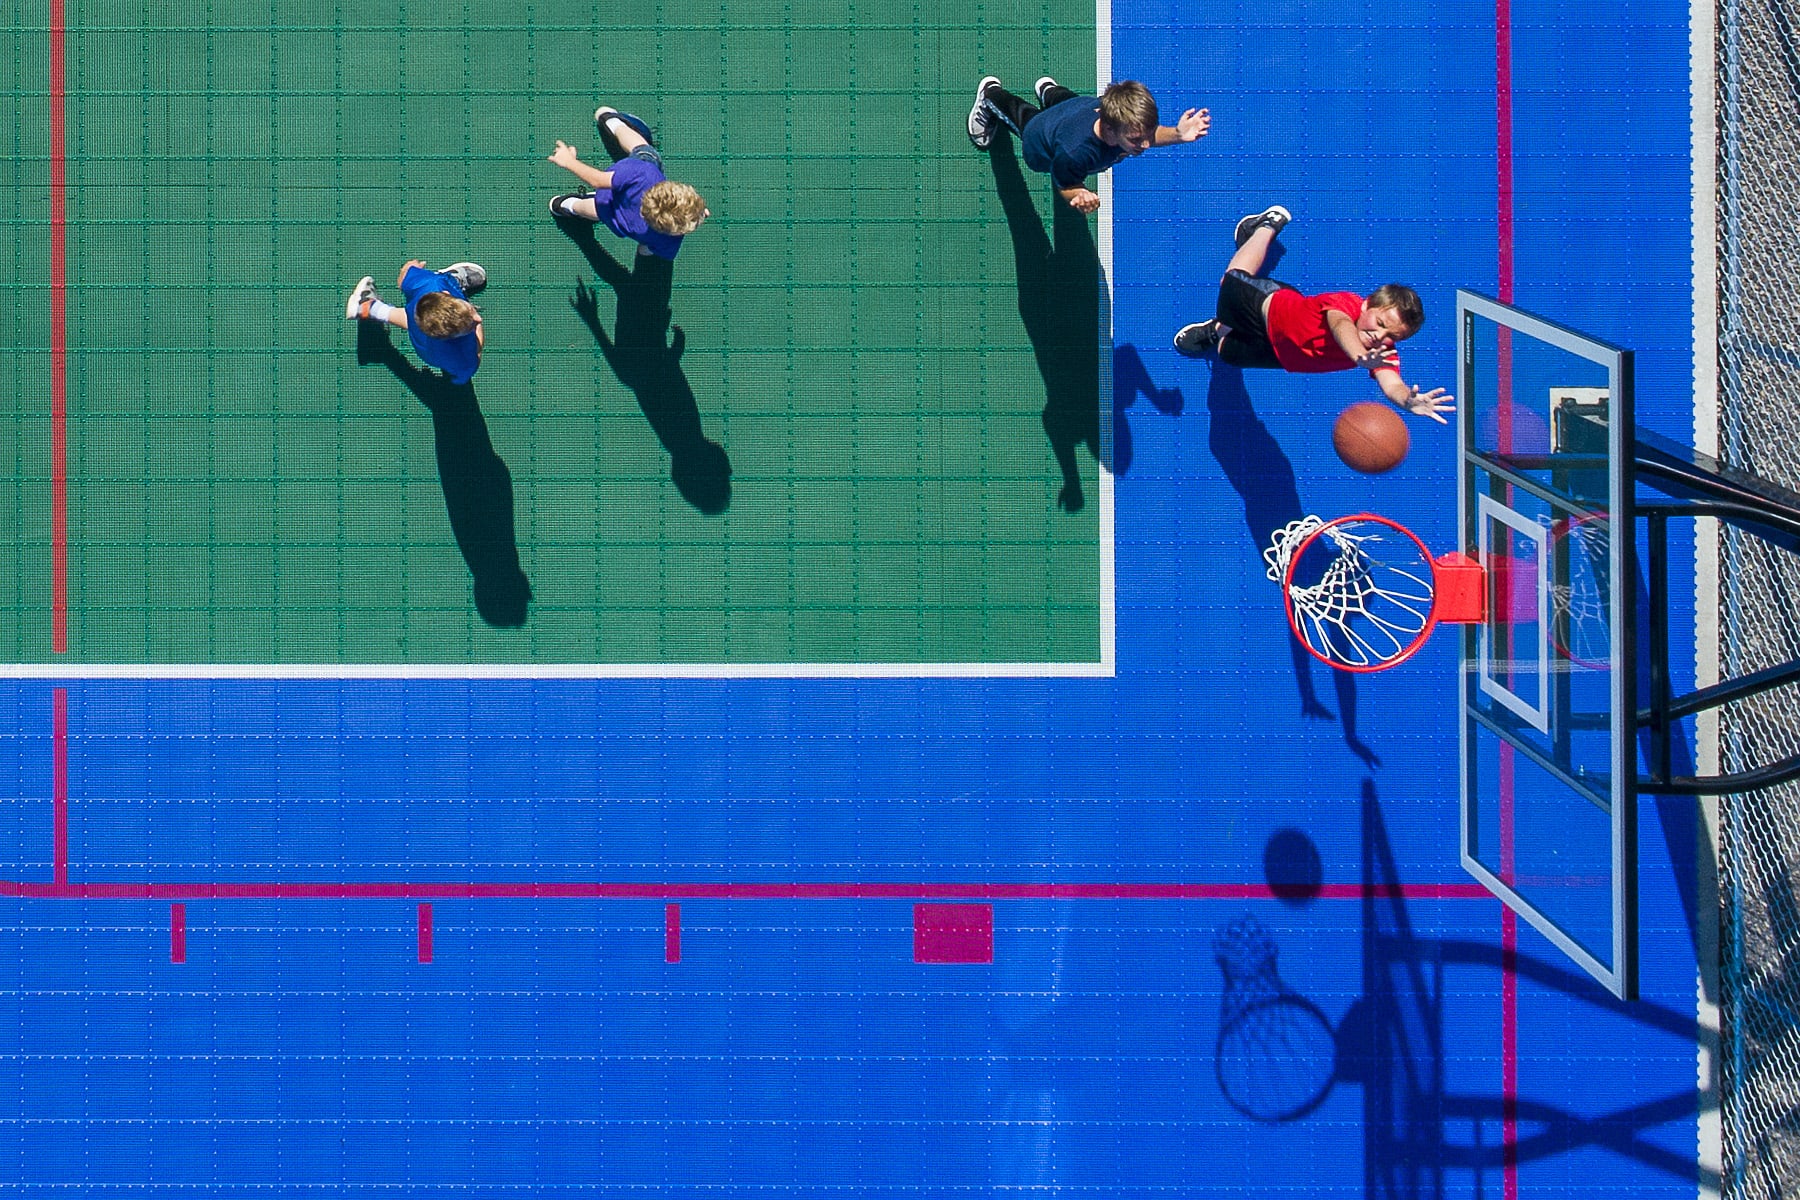 Overhead shot of a group of young boys playing basketball on a green and blue court